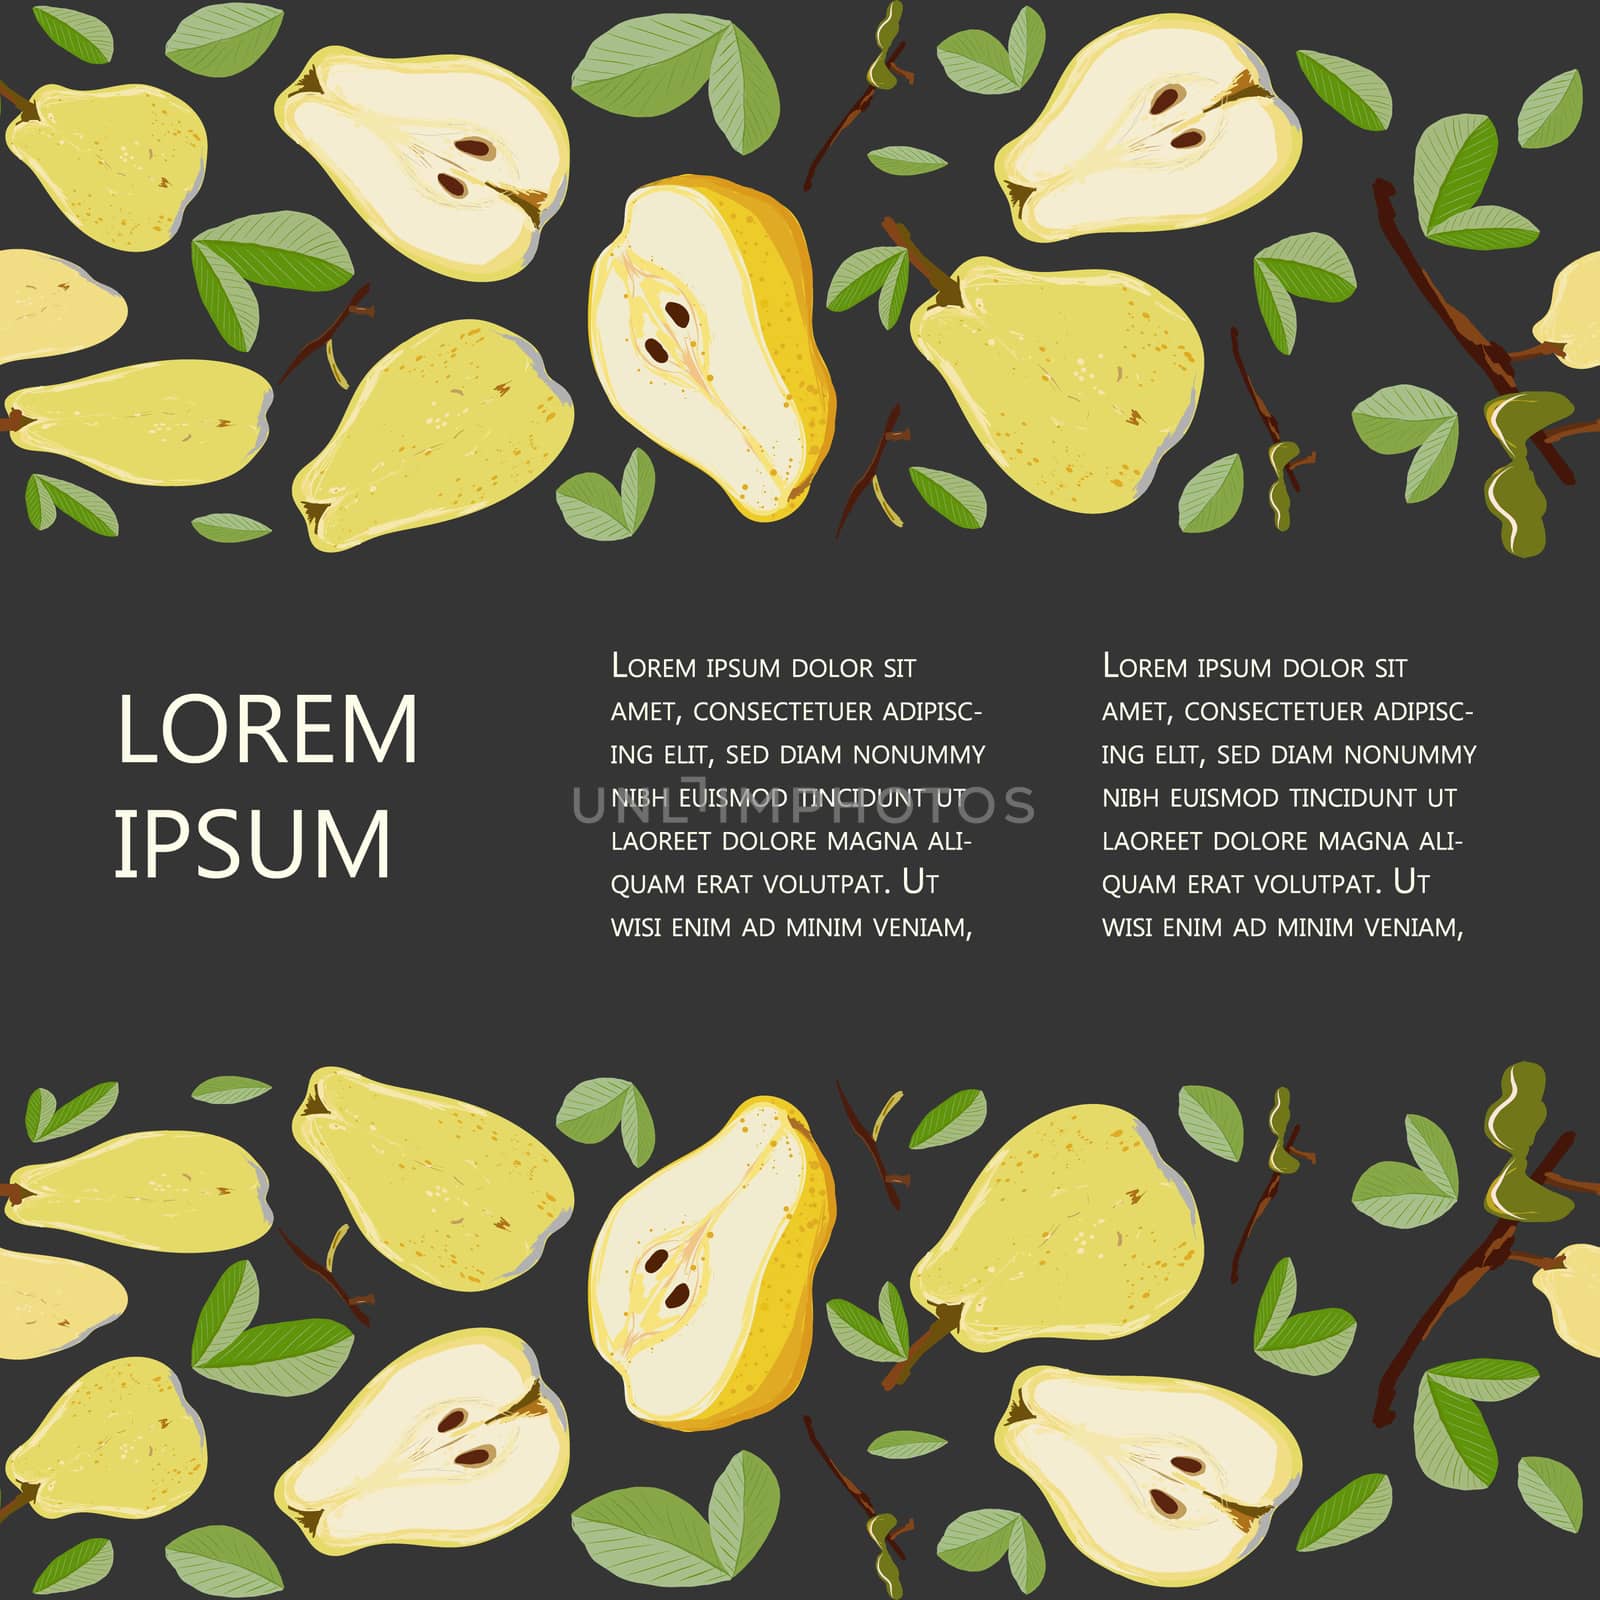 Whole and sliced pear seamless horizontal border with copy space vector illustration on black. Set for design, banner, menu, poster.